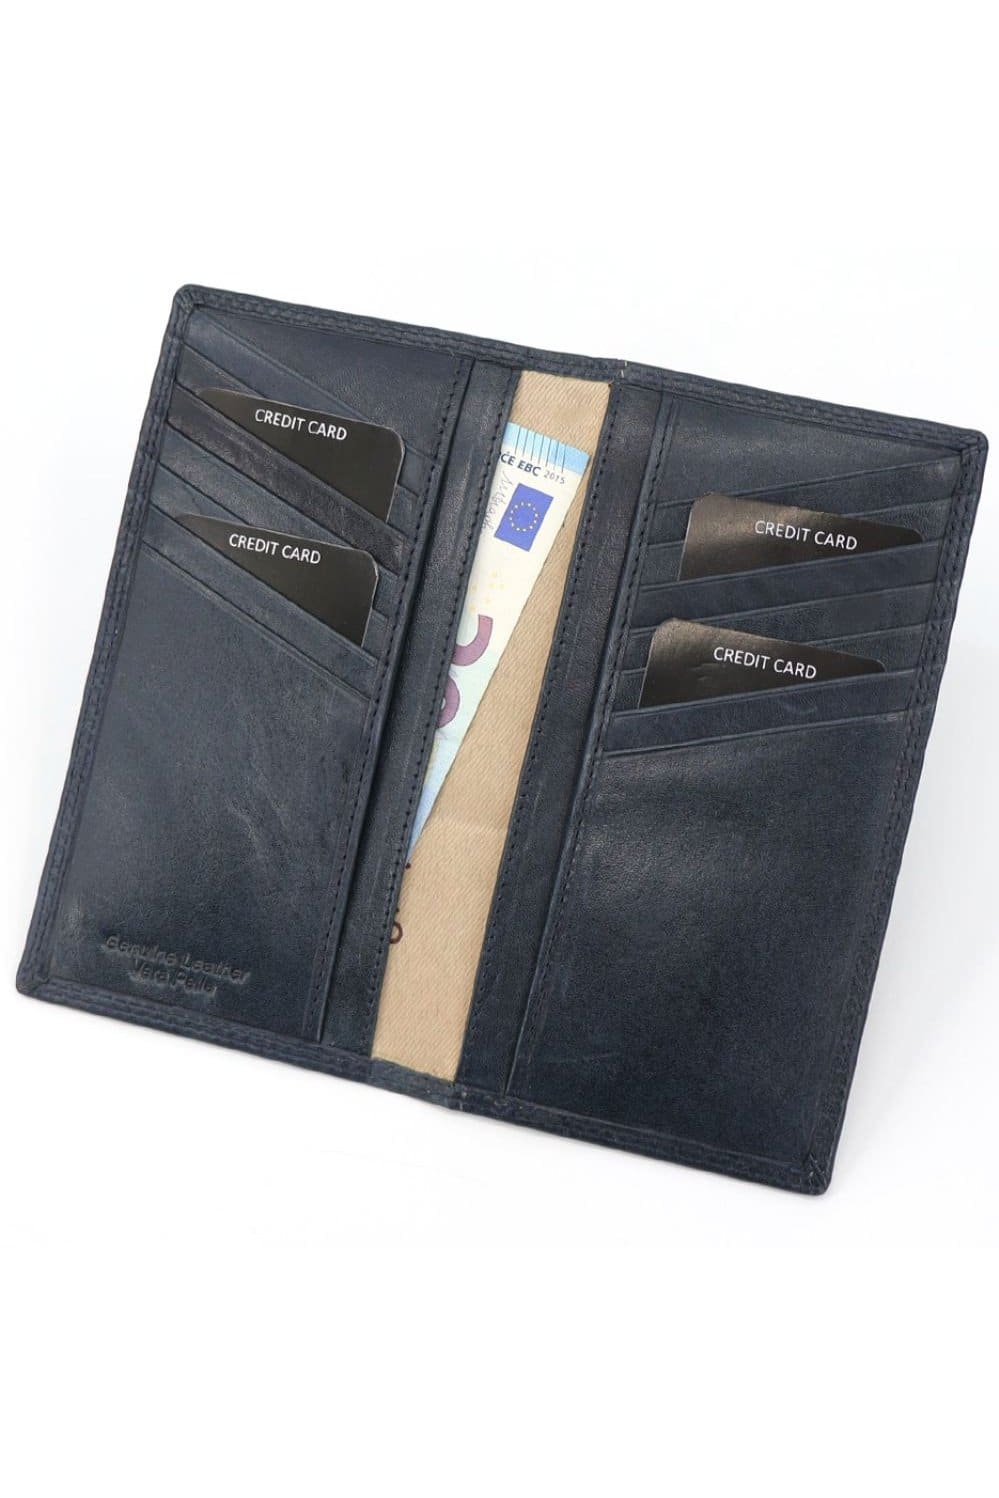 Gai Mattiolo leather card/document holder, Equipped with spaces for credit cards, documents or larger banknotes, Hidden back pocket, Blue Fatio General Trading